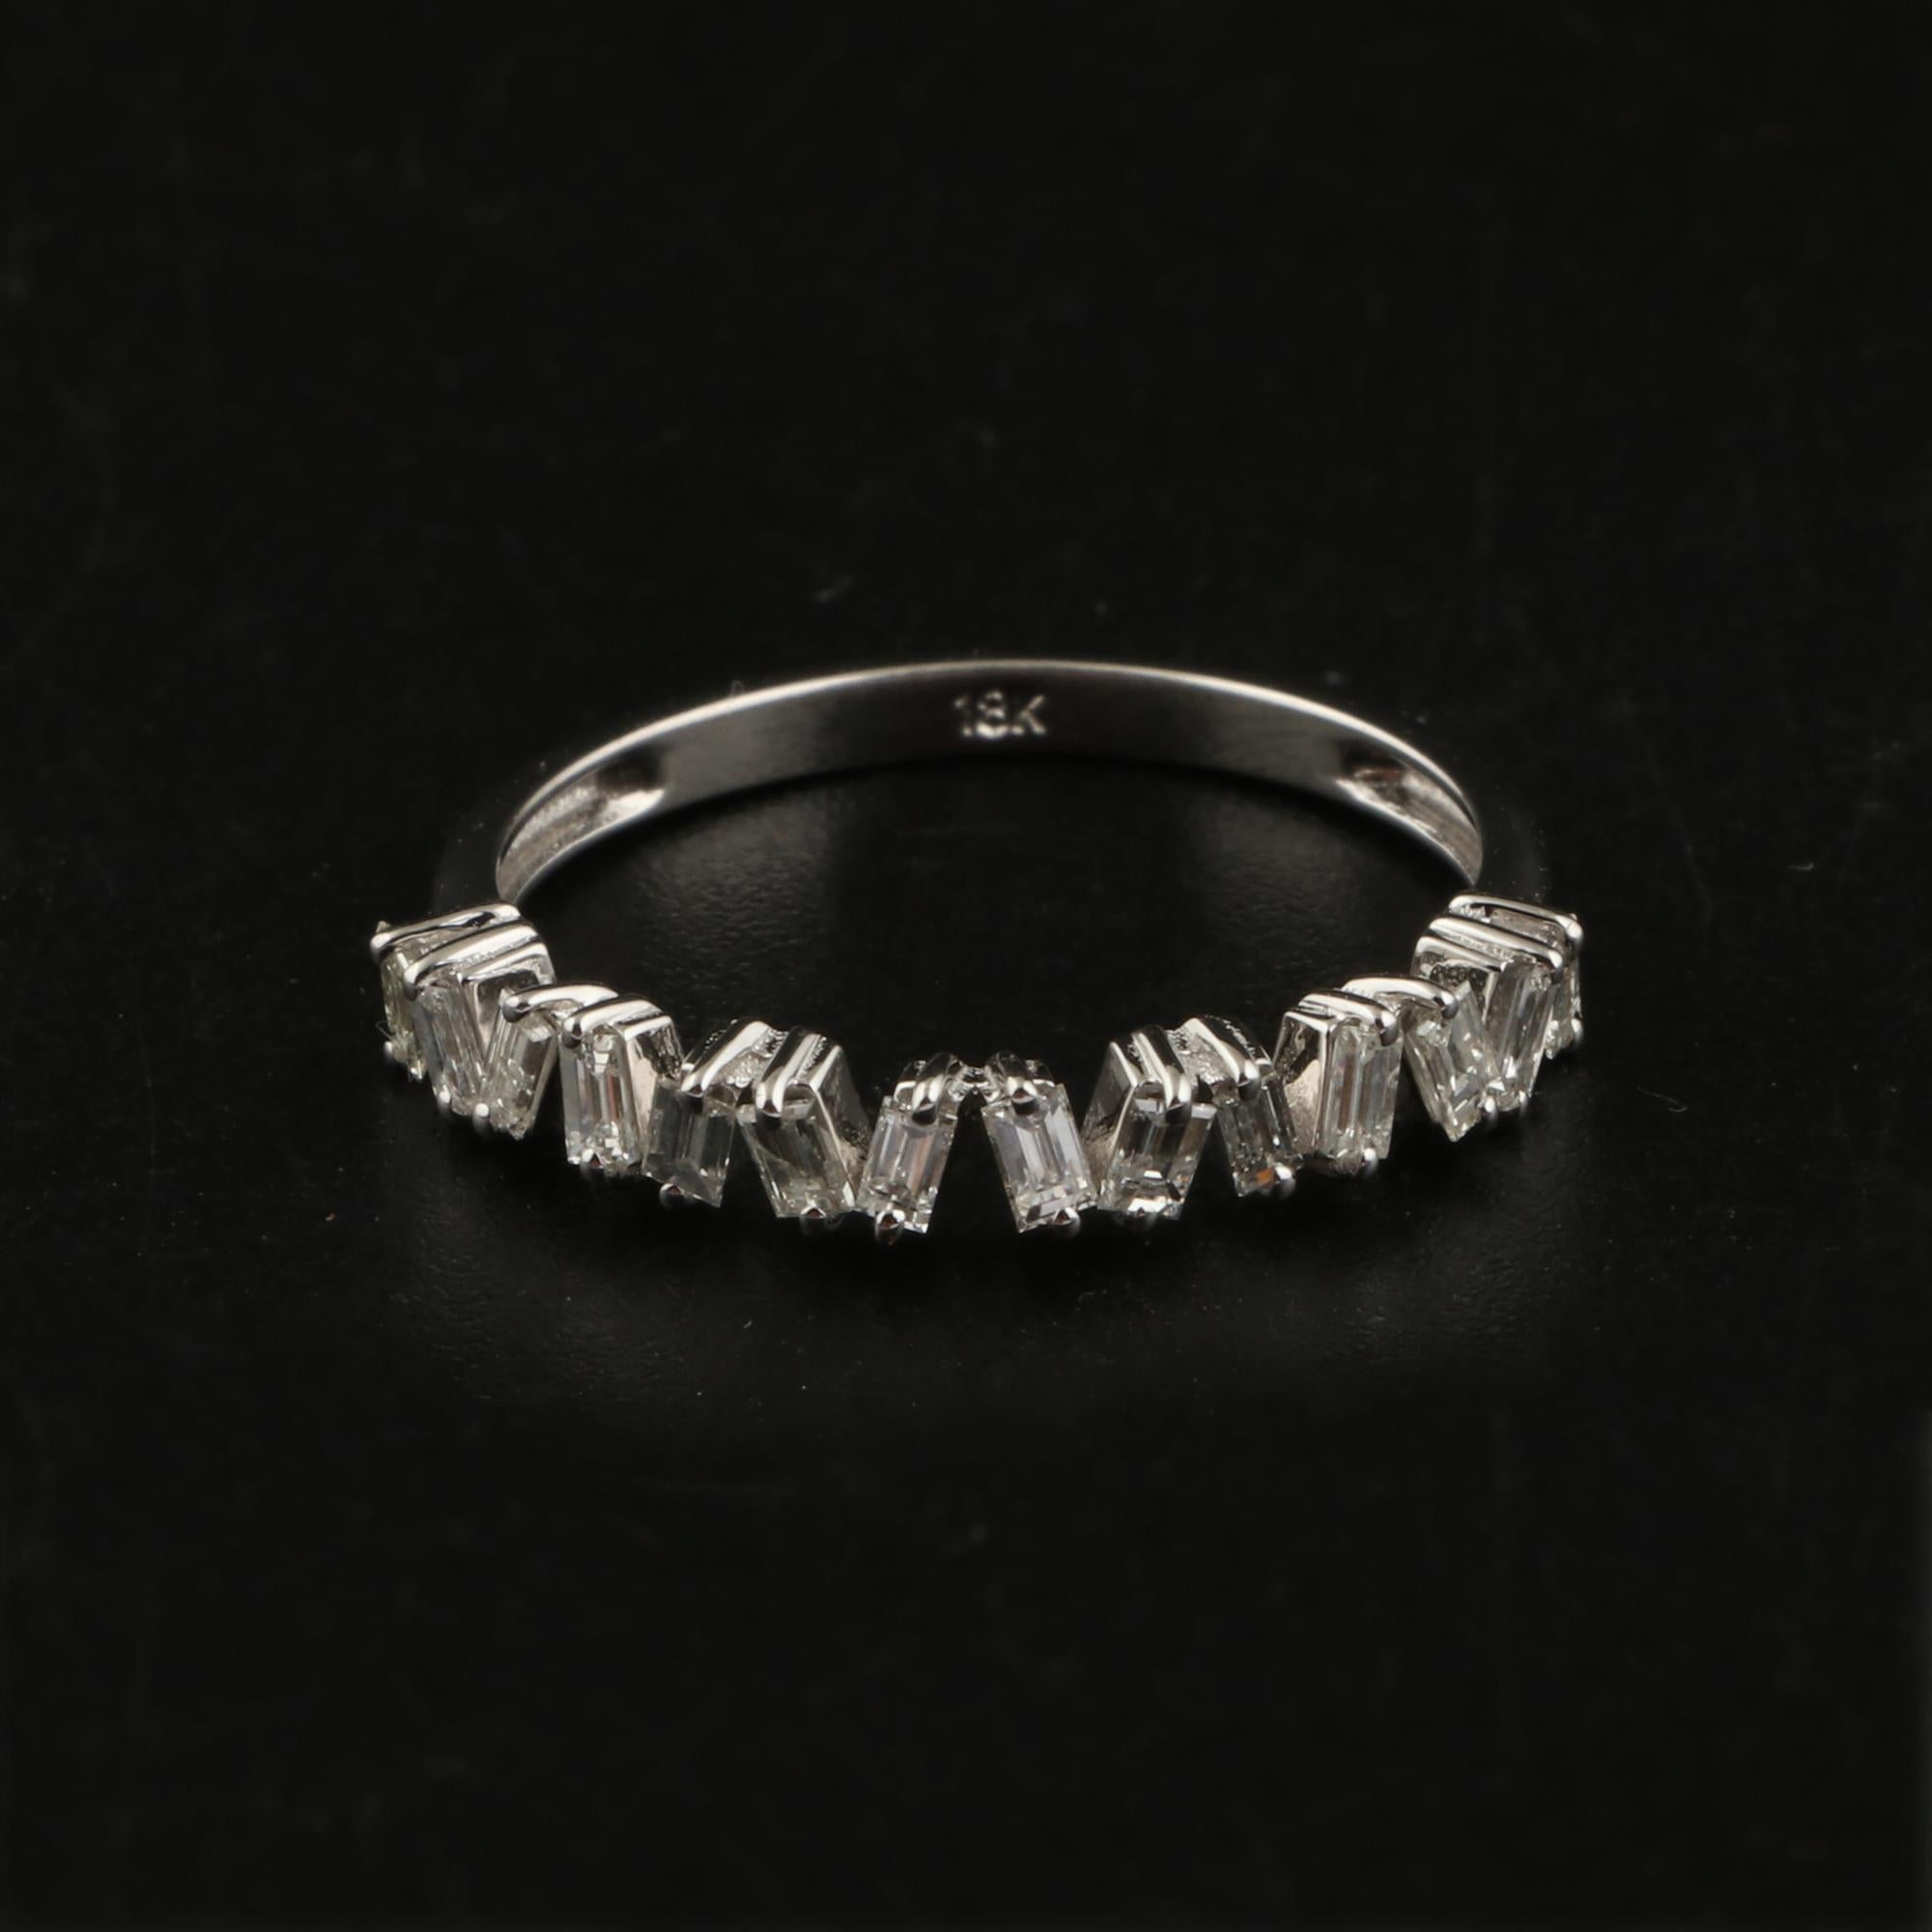 For Sale:  SI Clarity HI Color Baguette Diamond Ring 18 Karat White Gold Handmade Jewelry 8